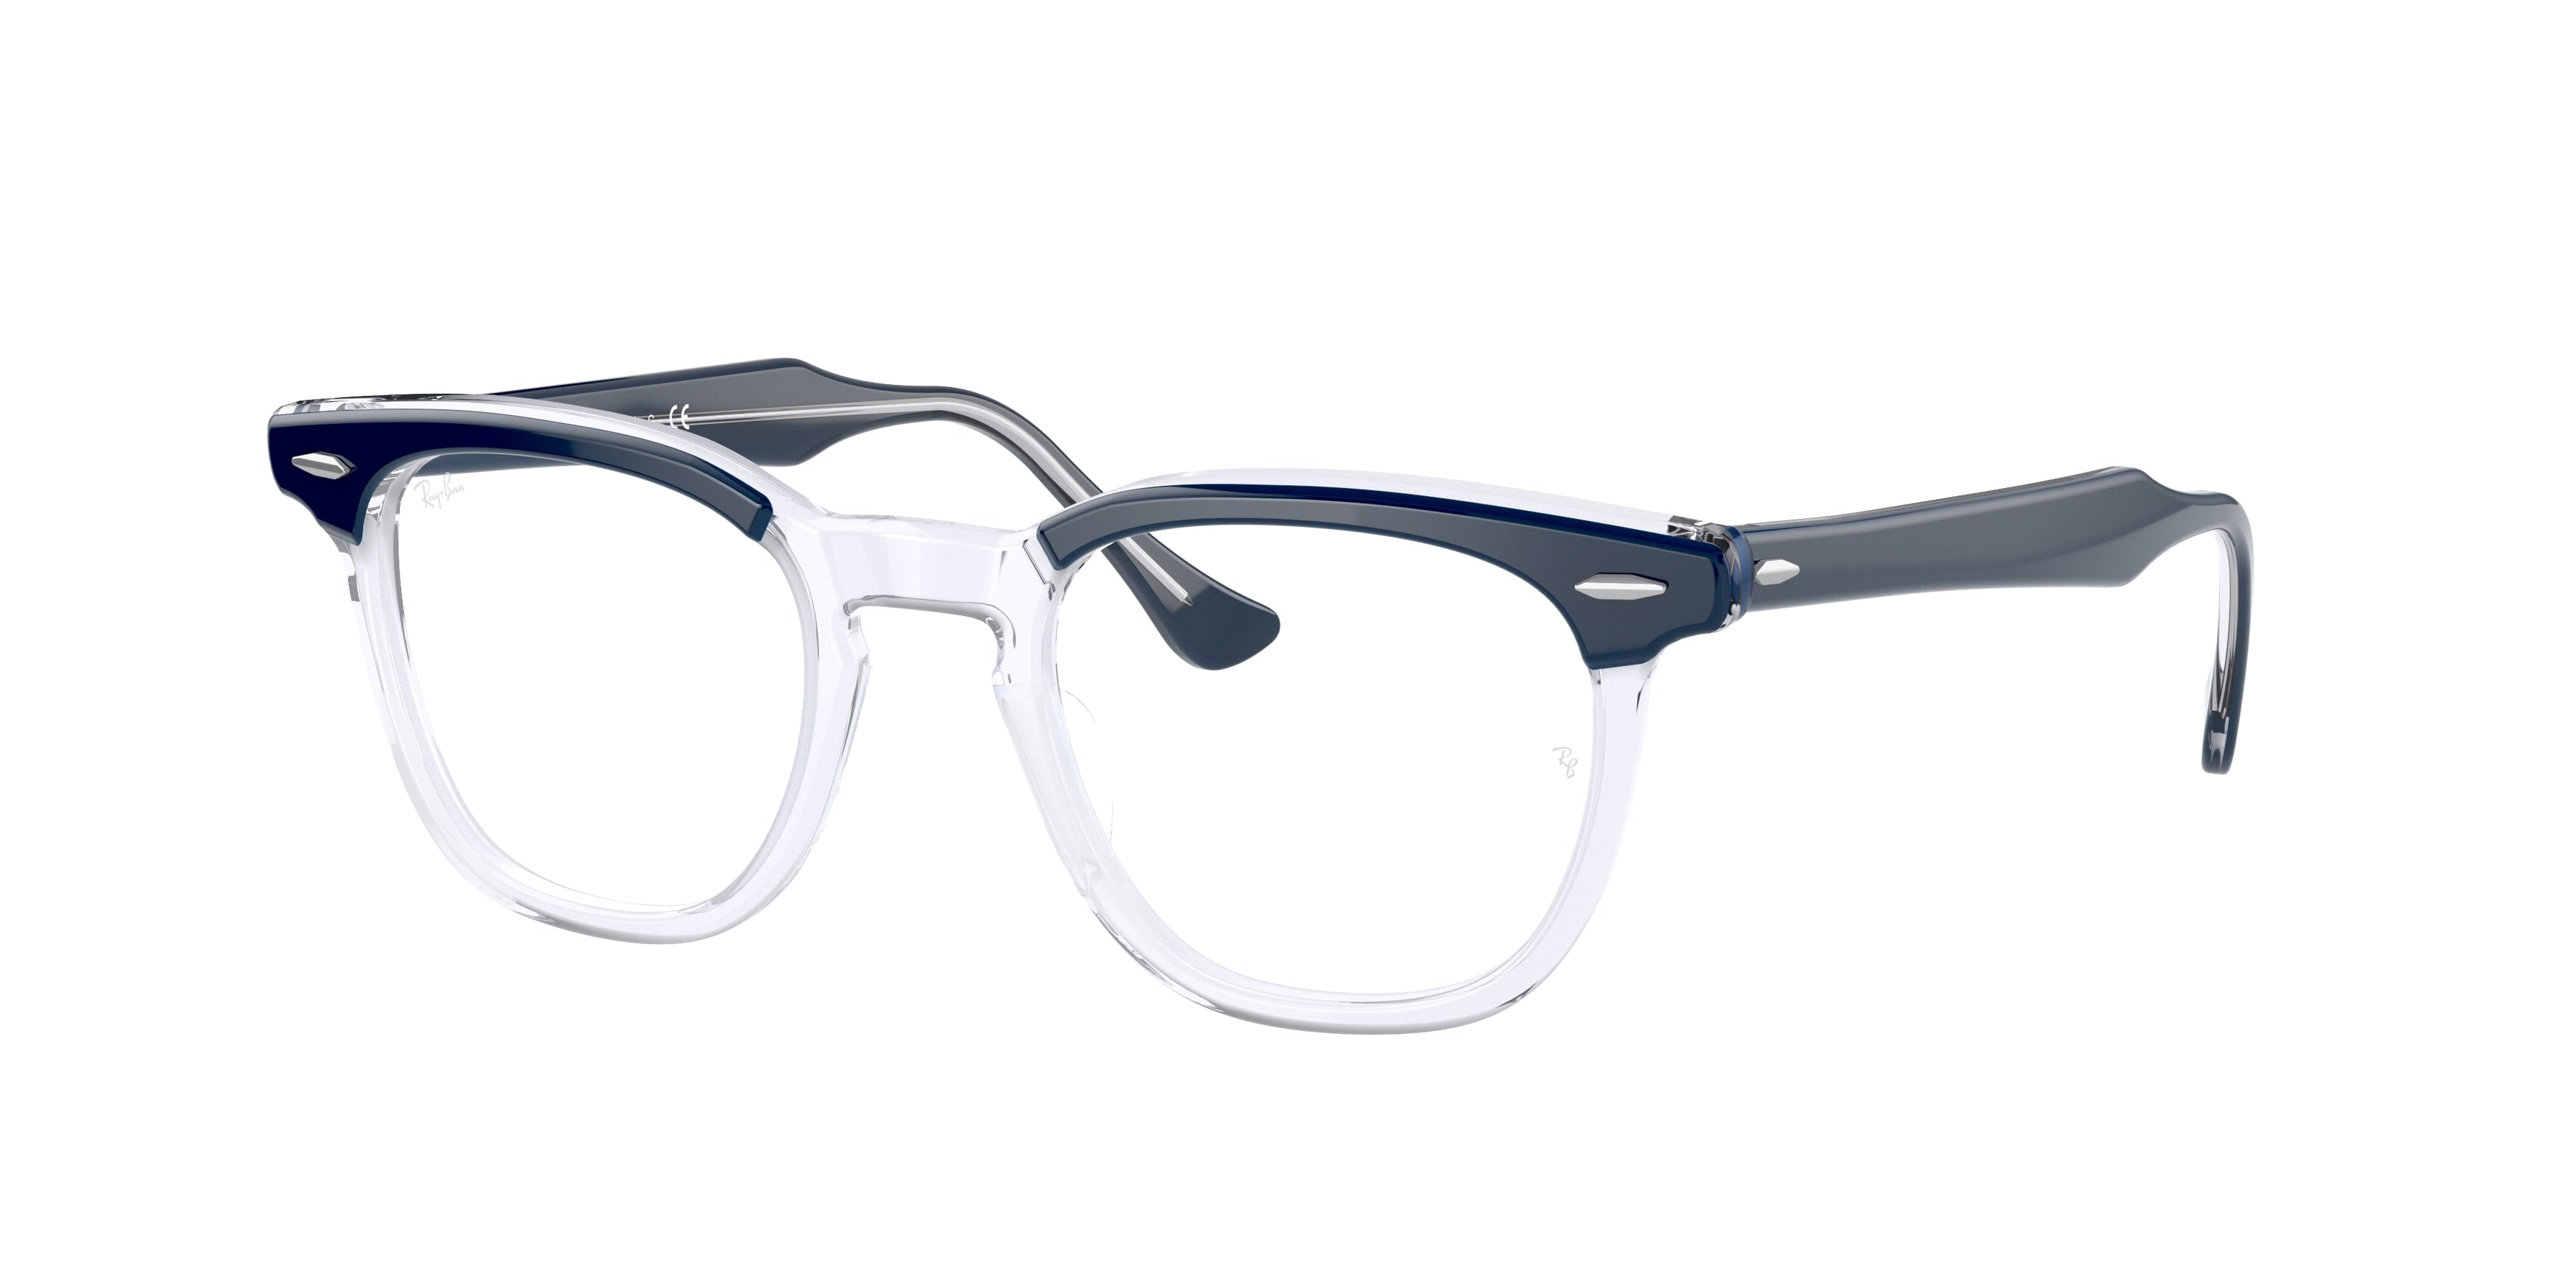 Ray-Ban Optical HAWKEYE RX5398 Square Eyeglasses  8110-Transparent Blue 48-145-21 - Color Map Blue